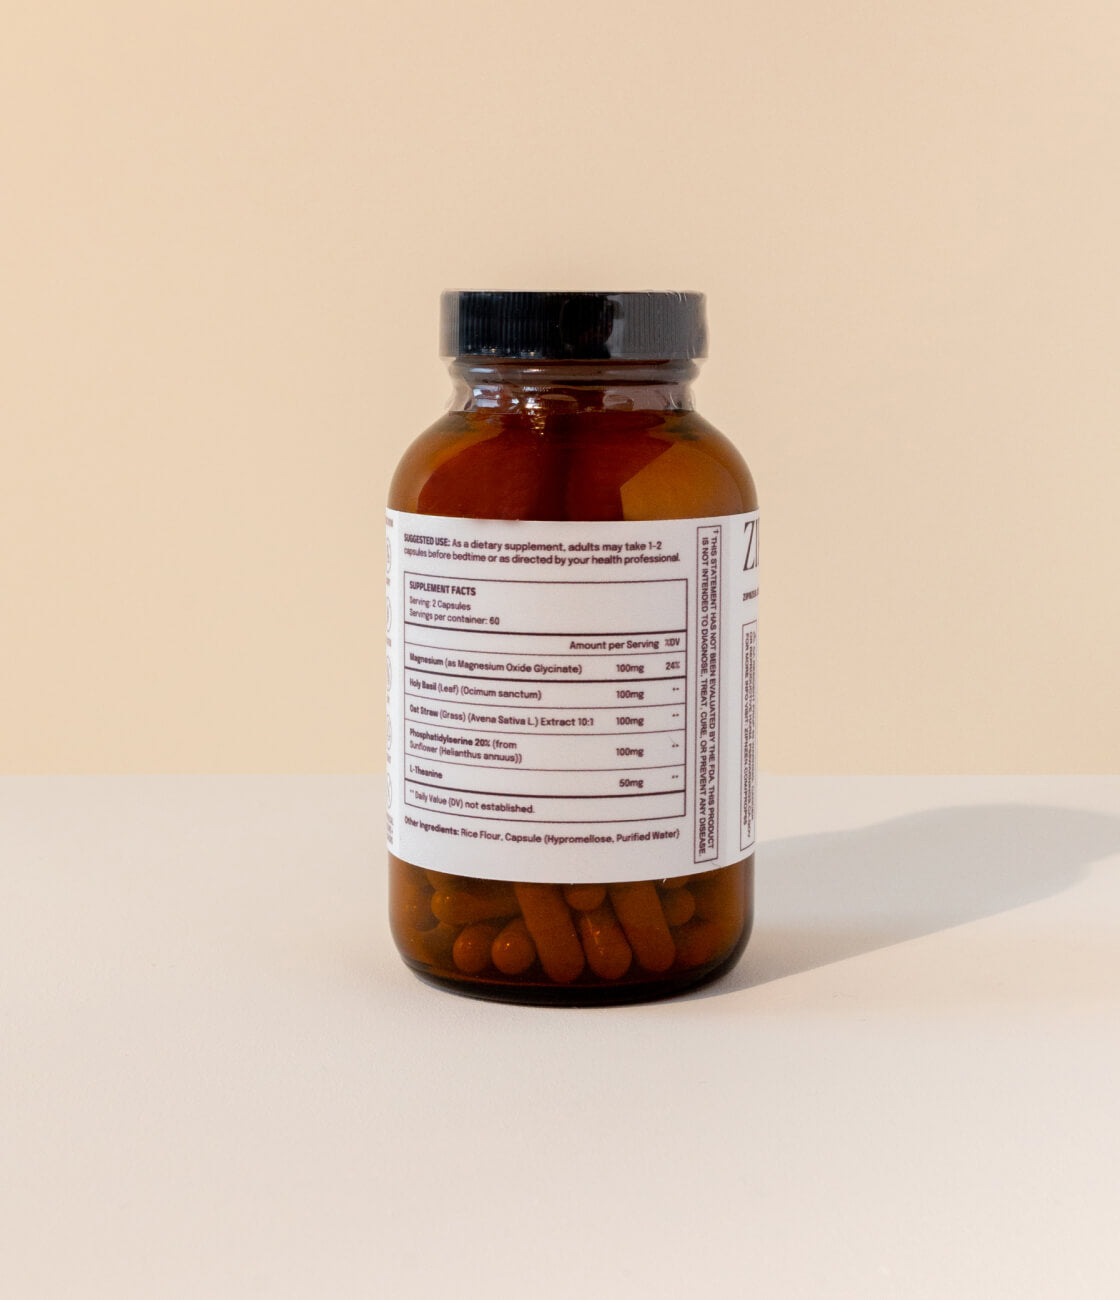 Zip is a blend of vitamins and minerals designed to treat the root cause of adrenal fatigue and stress. [AD: The back of the Zip bottle is shown with the Nutritional information displayed for the photograph.]